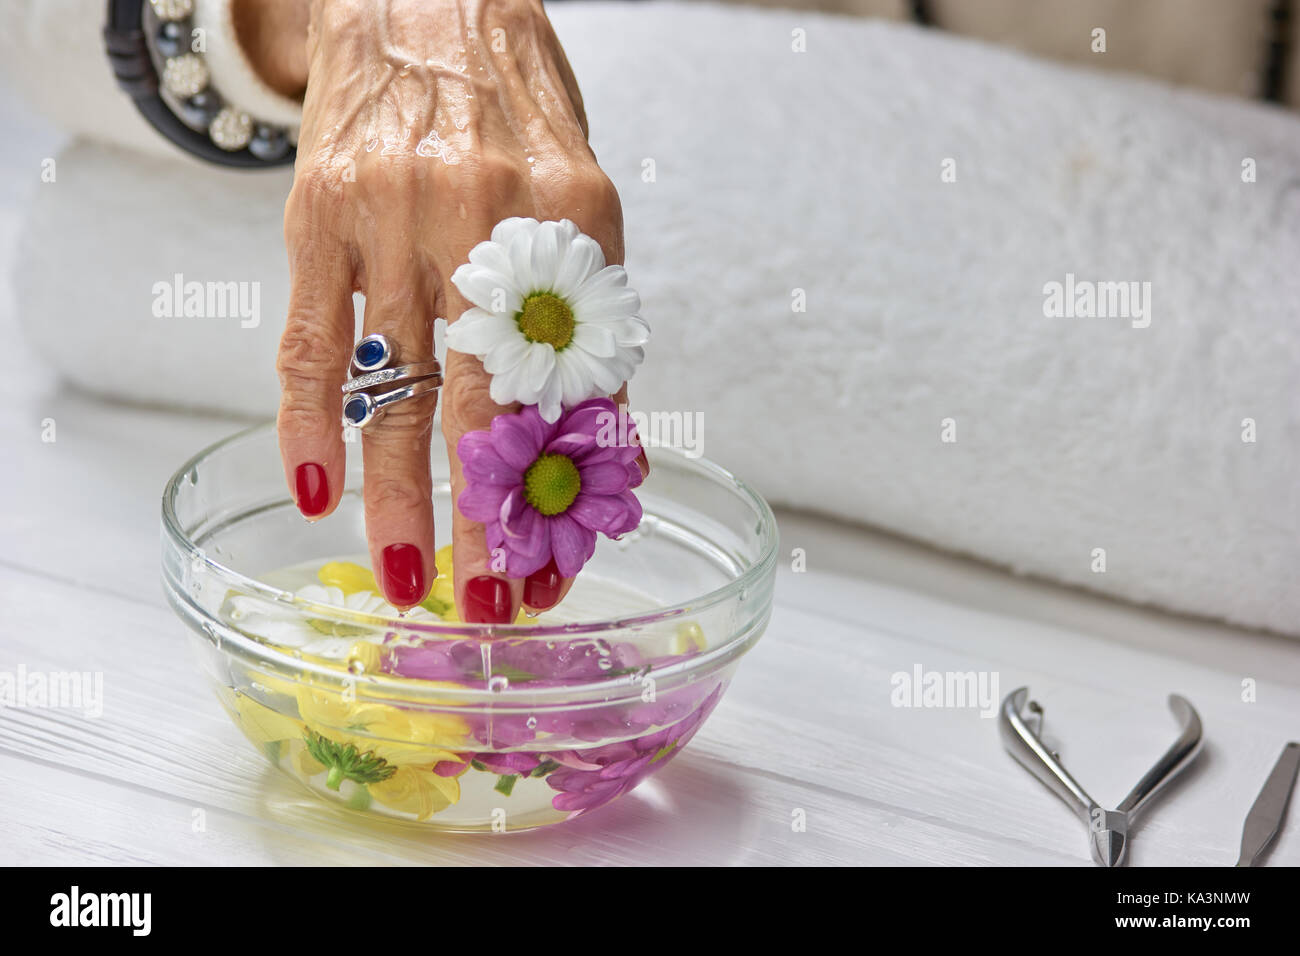 Spa treatment for female hands. Senior woman manicured hand with two colored chrysanthemum in glass bowl with water. Womans relax and treatment. Stock Photo